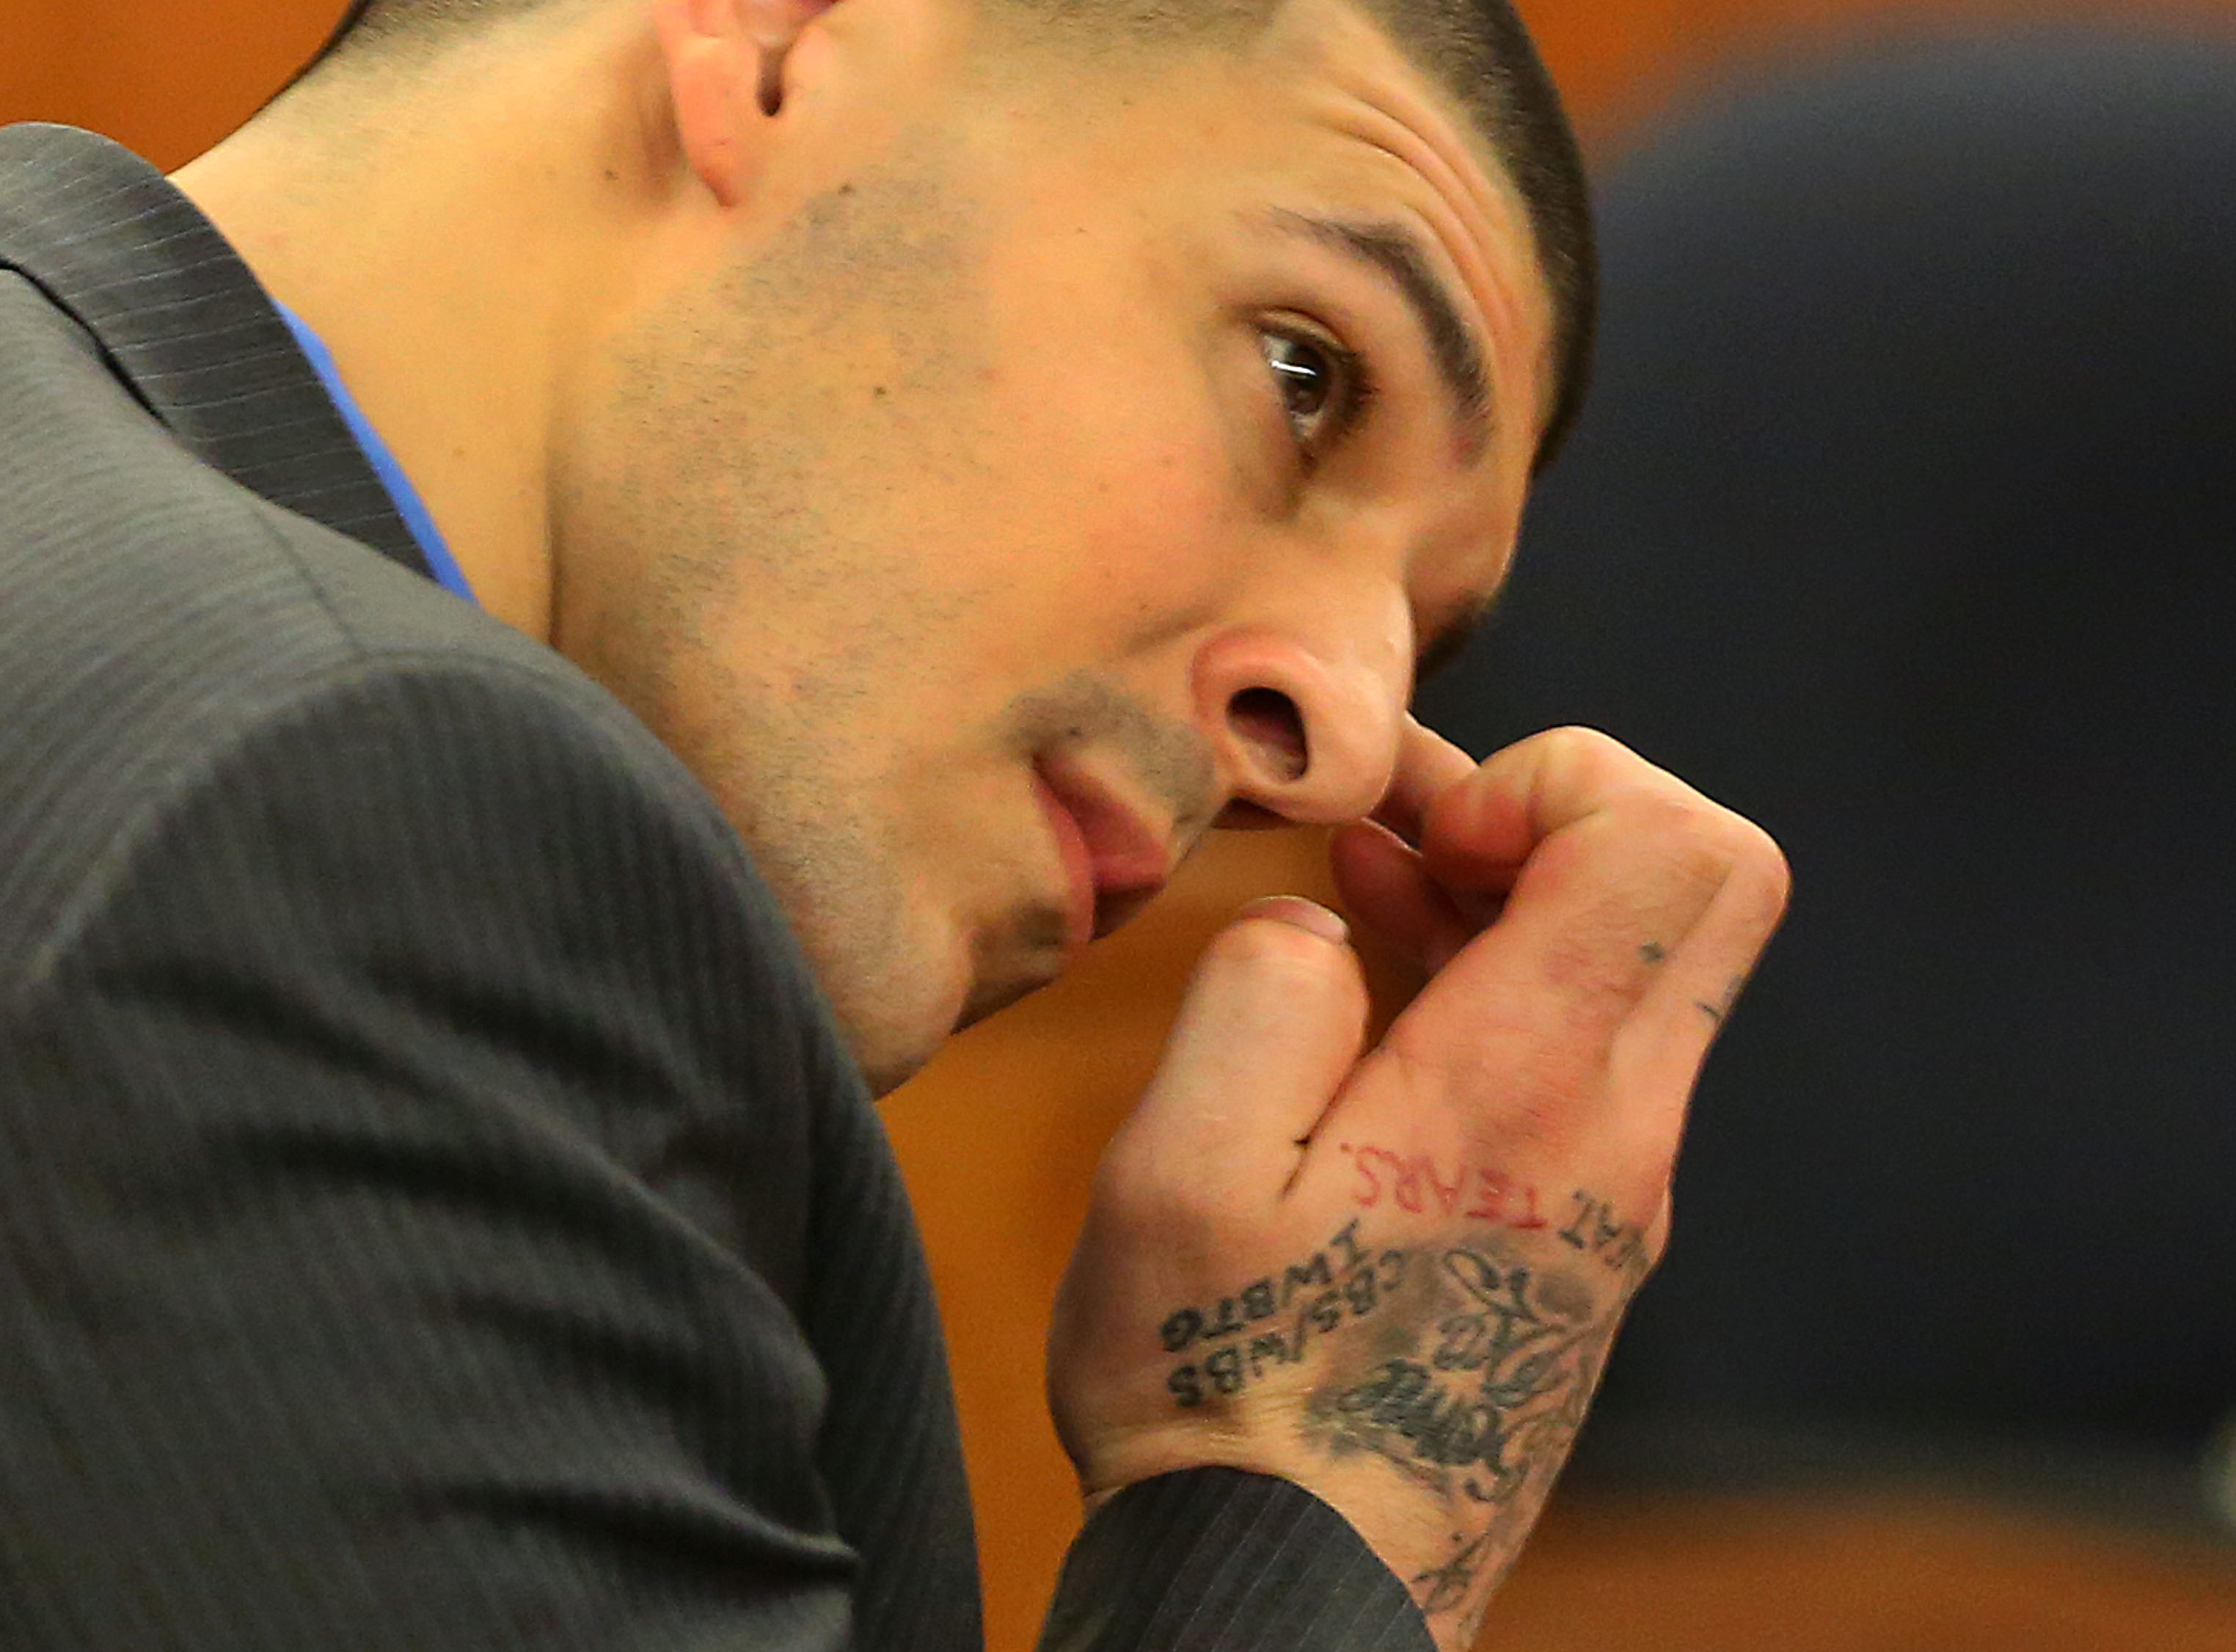 New Details About Aaron Hernandez's Life In Prison Have Surfaced, And